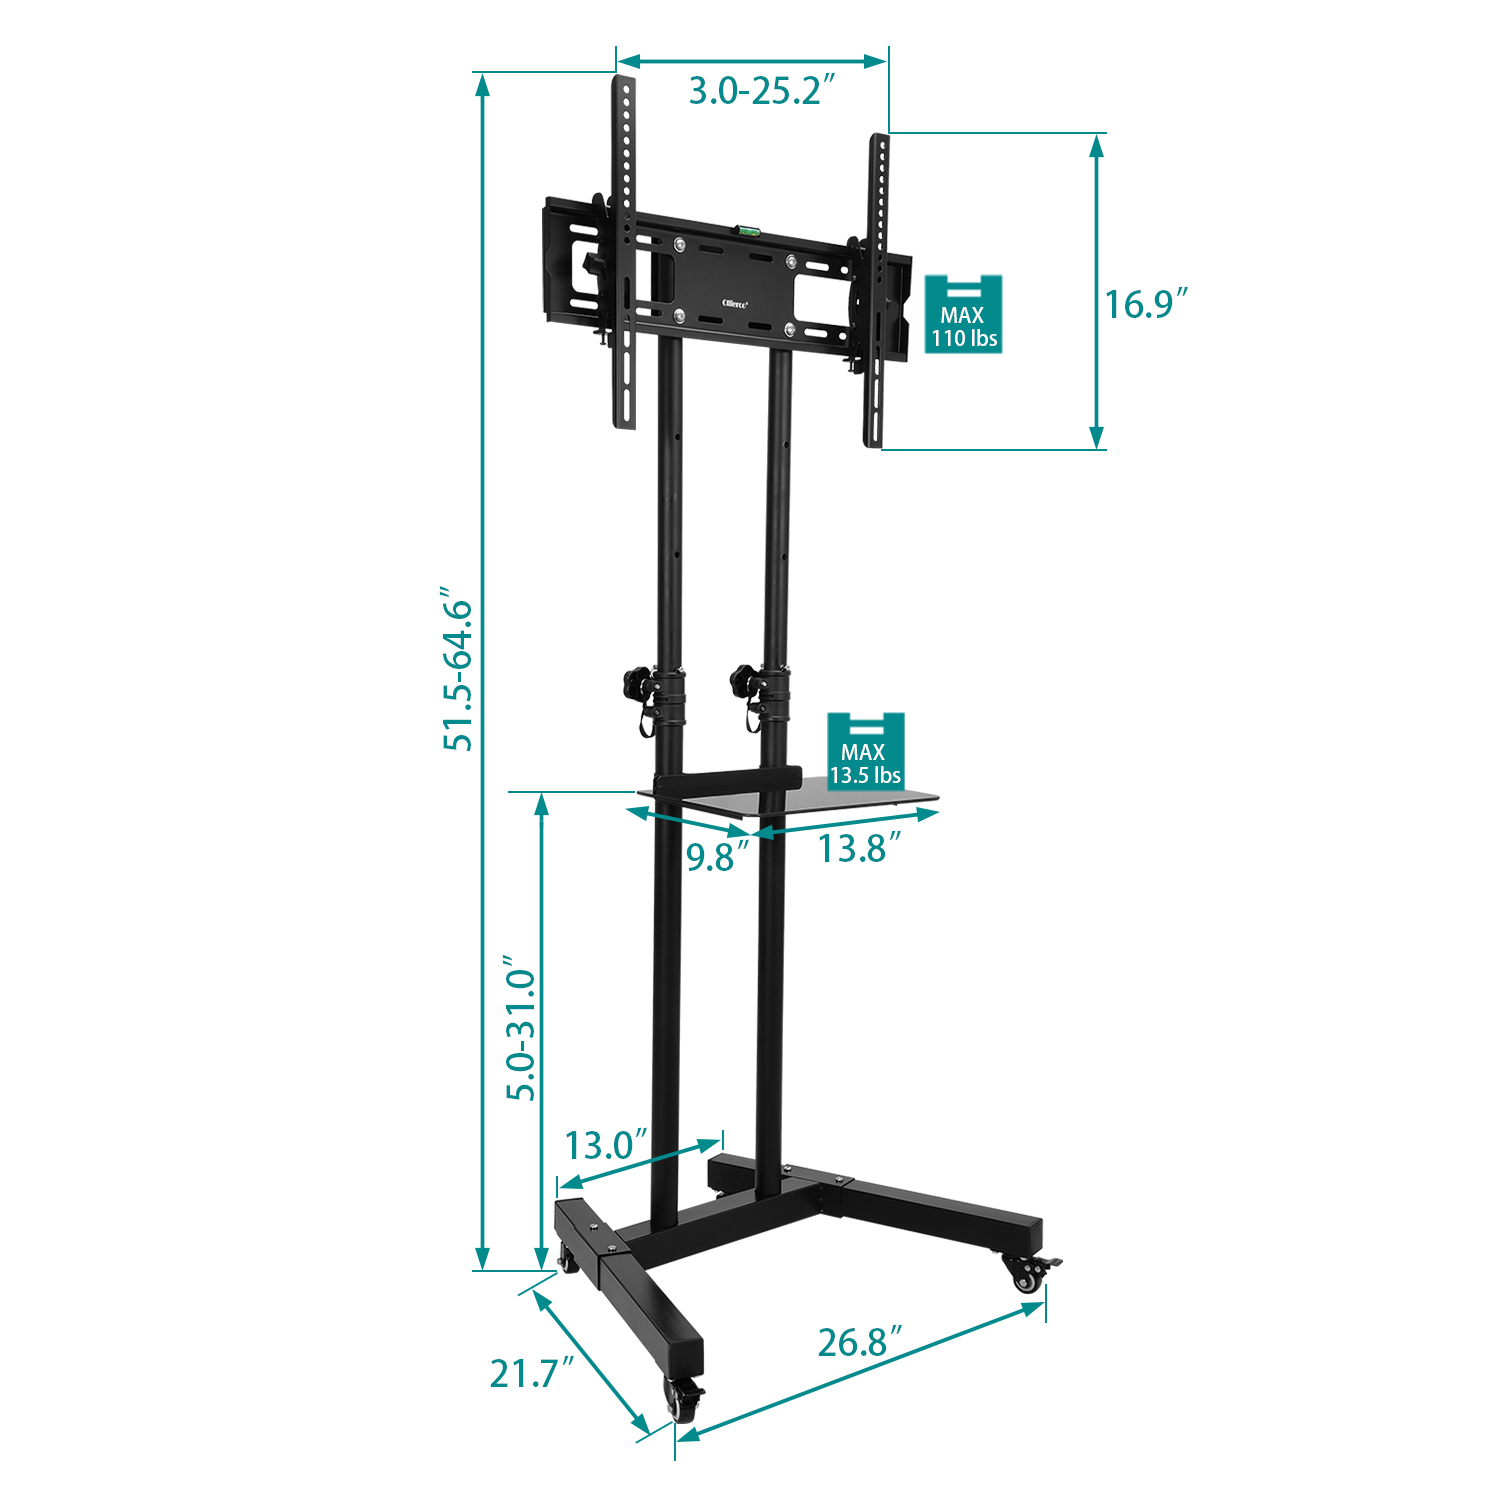 Allieroo TV Mobile Stand Height Adjustable for Most 32-65 Inch TVs Flat Panel Screens with Wheels - image 5 of 6